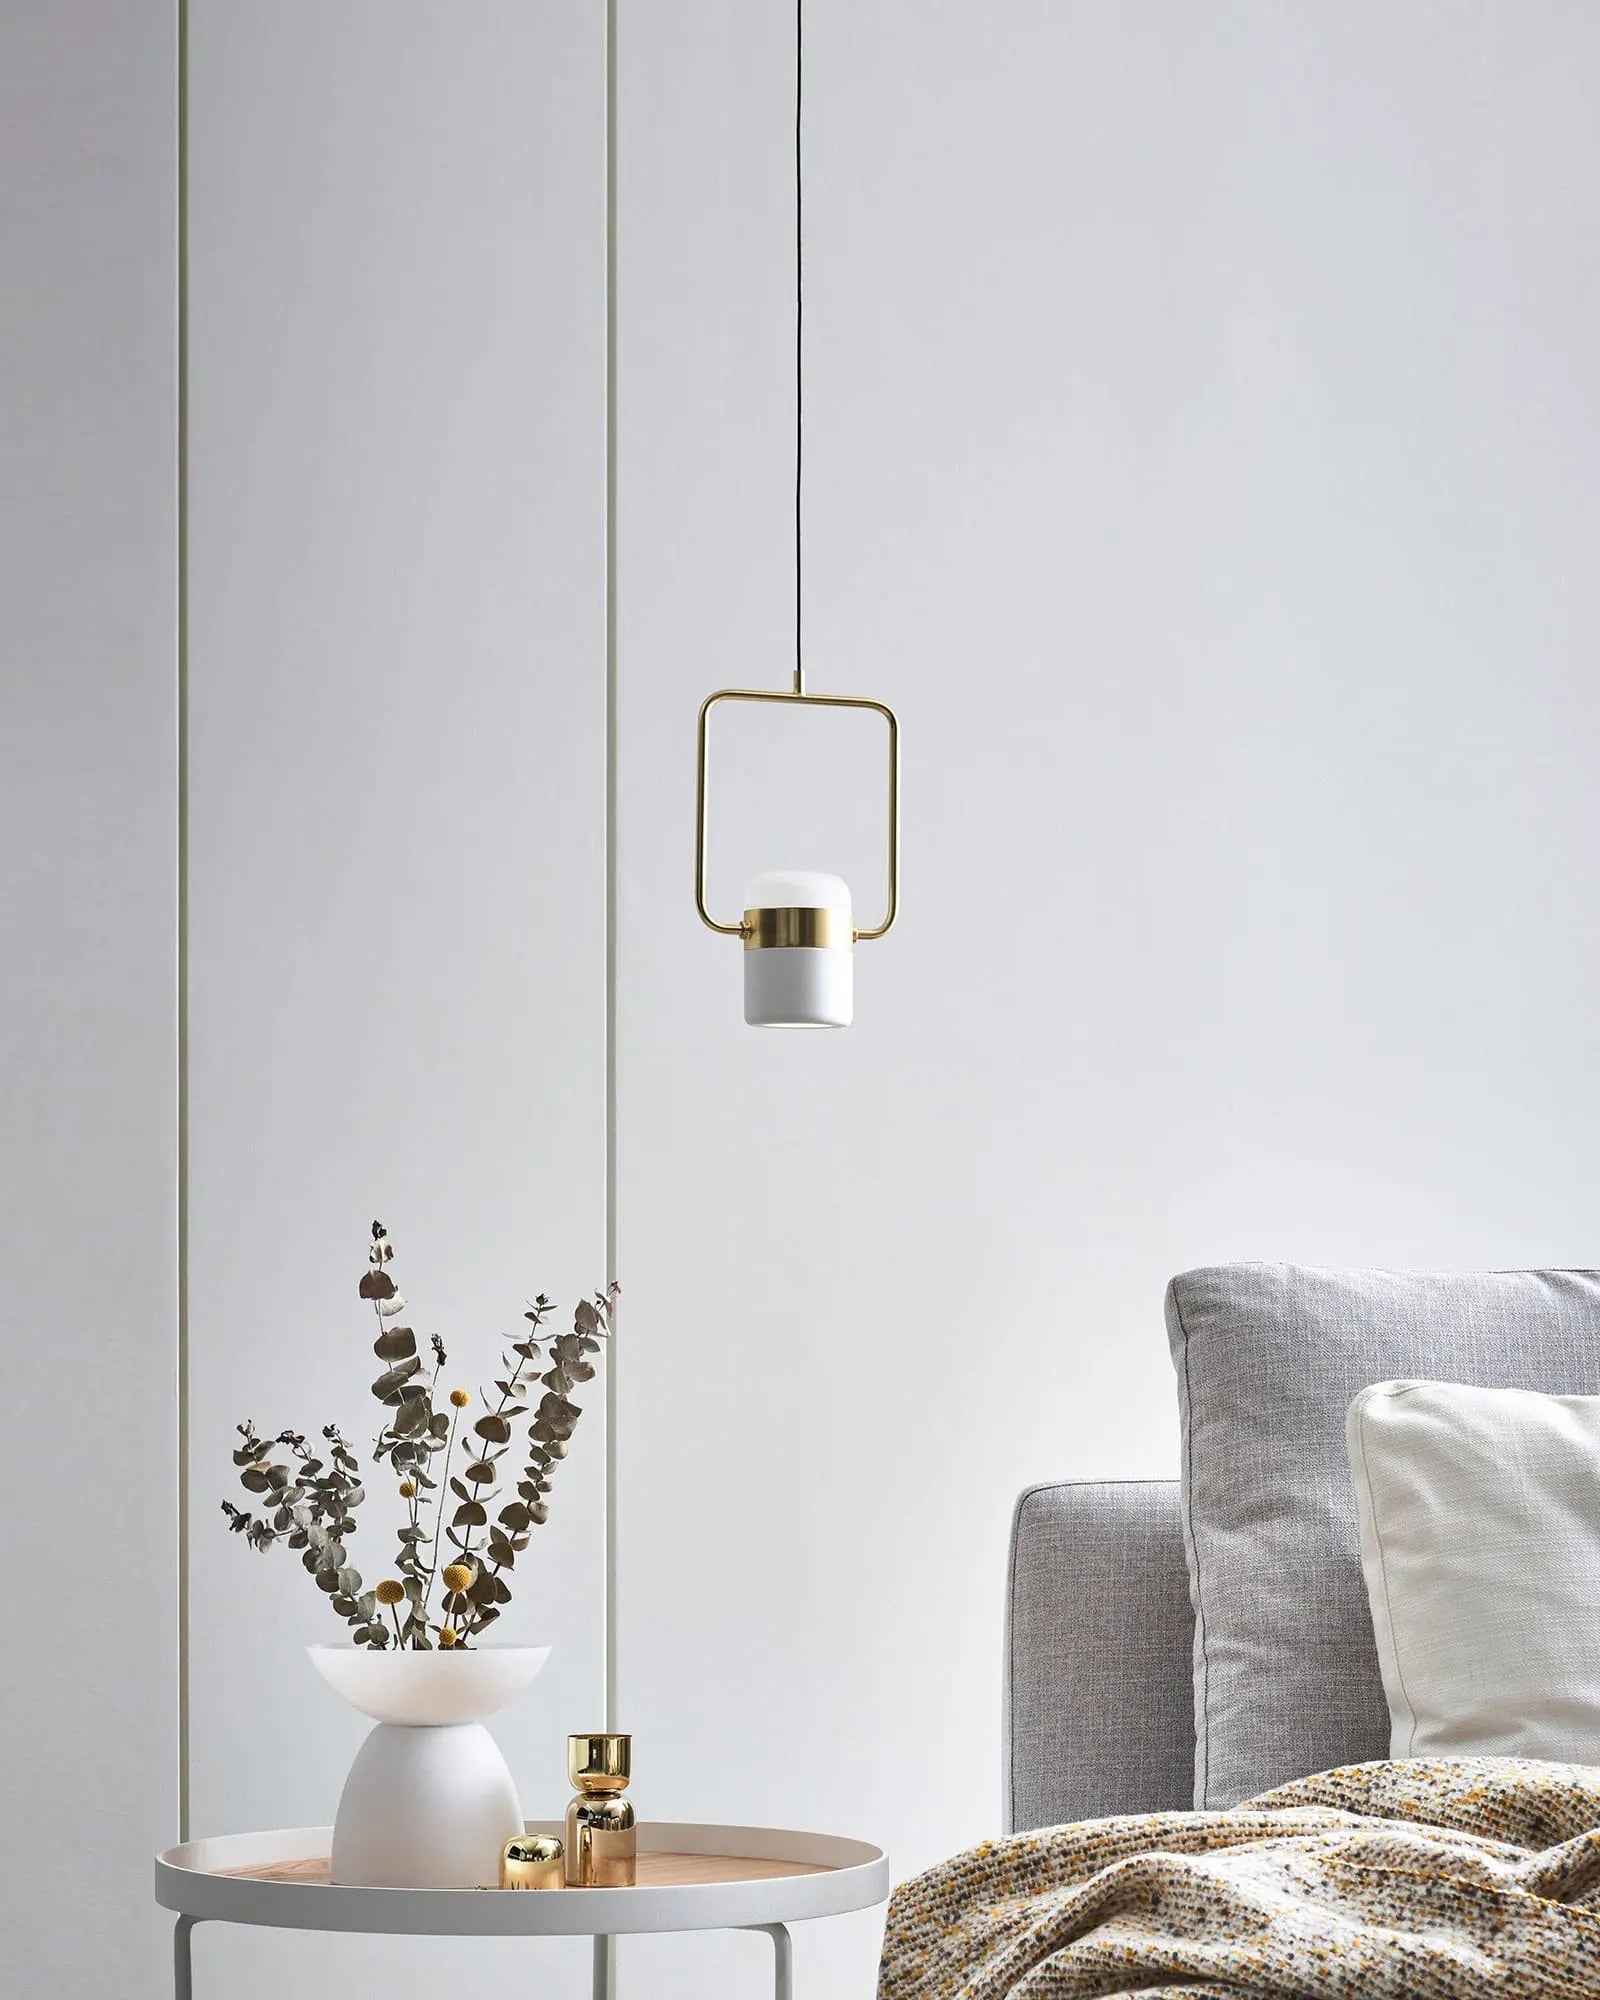 Ling pendant light on the bed side